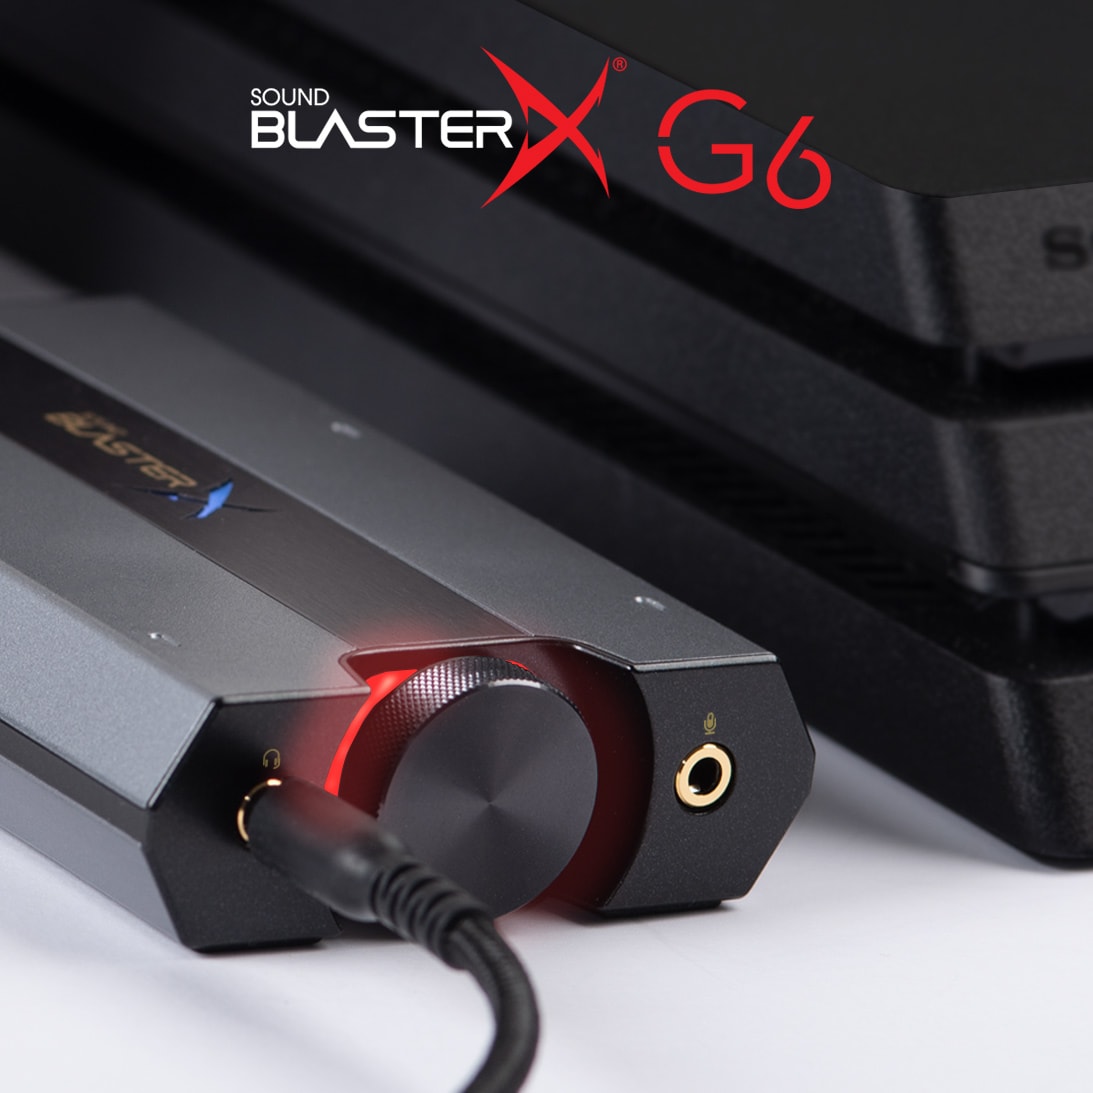 Sound BlasterX G6: The best gaming DAC and USB sound card on the 